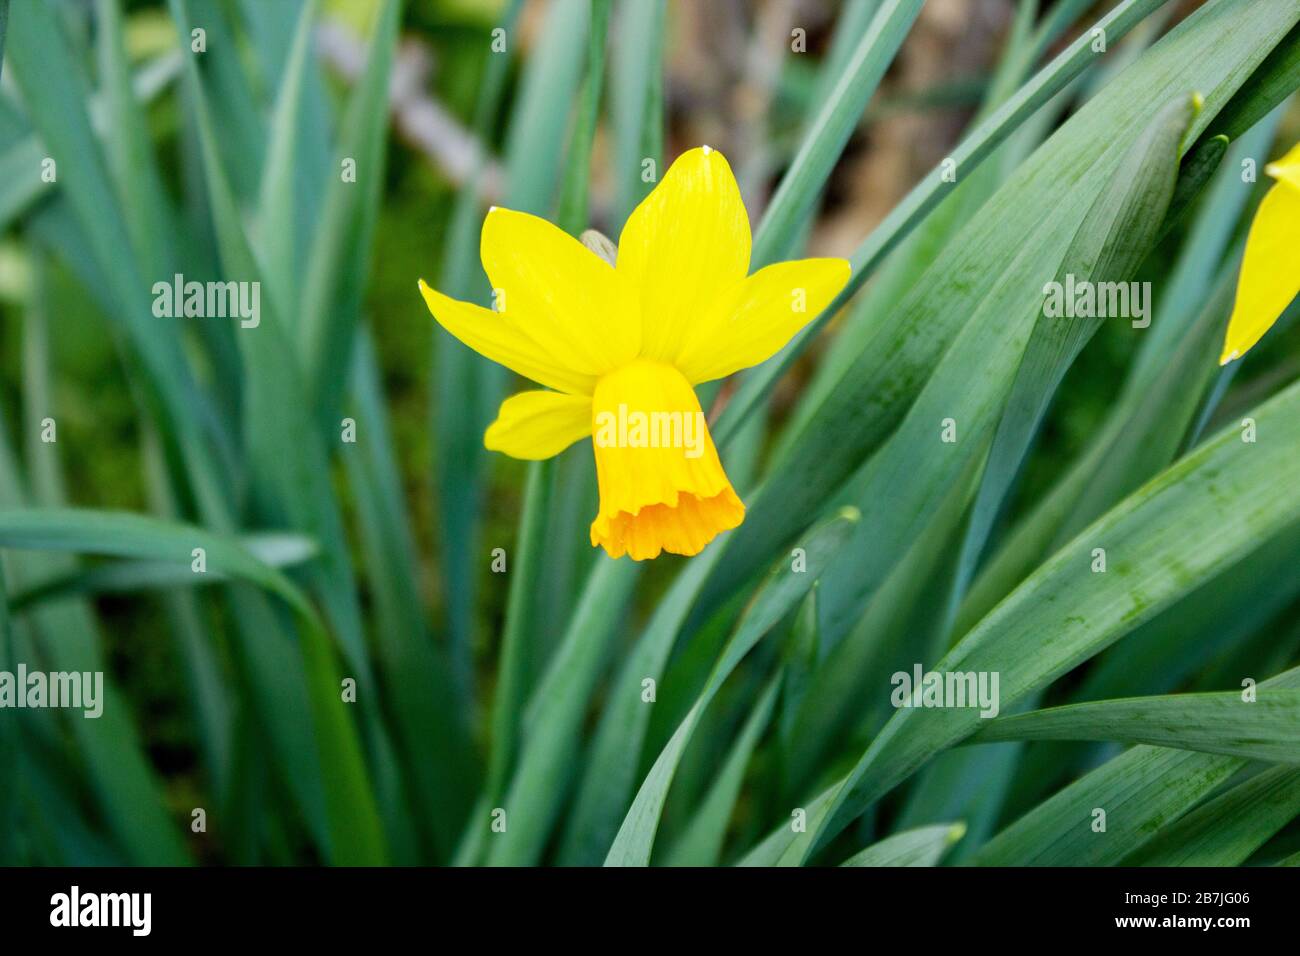 The yellow daffodil, also known as lent lily, is the best known plant from the daffodil genus within the family of the amaryllis family Stock Photo